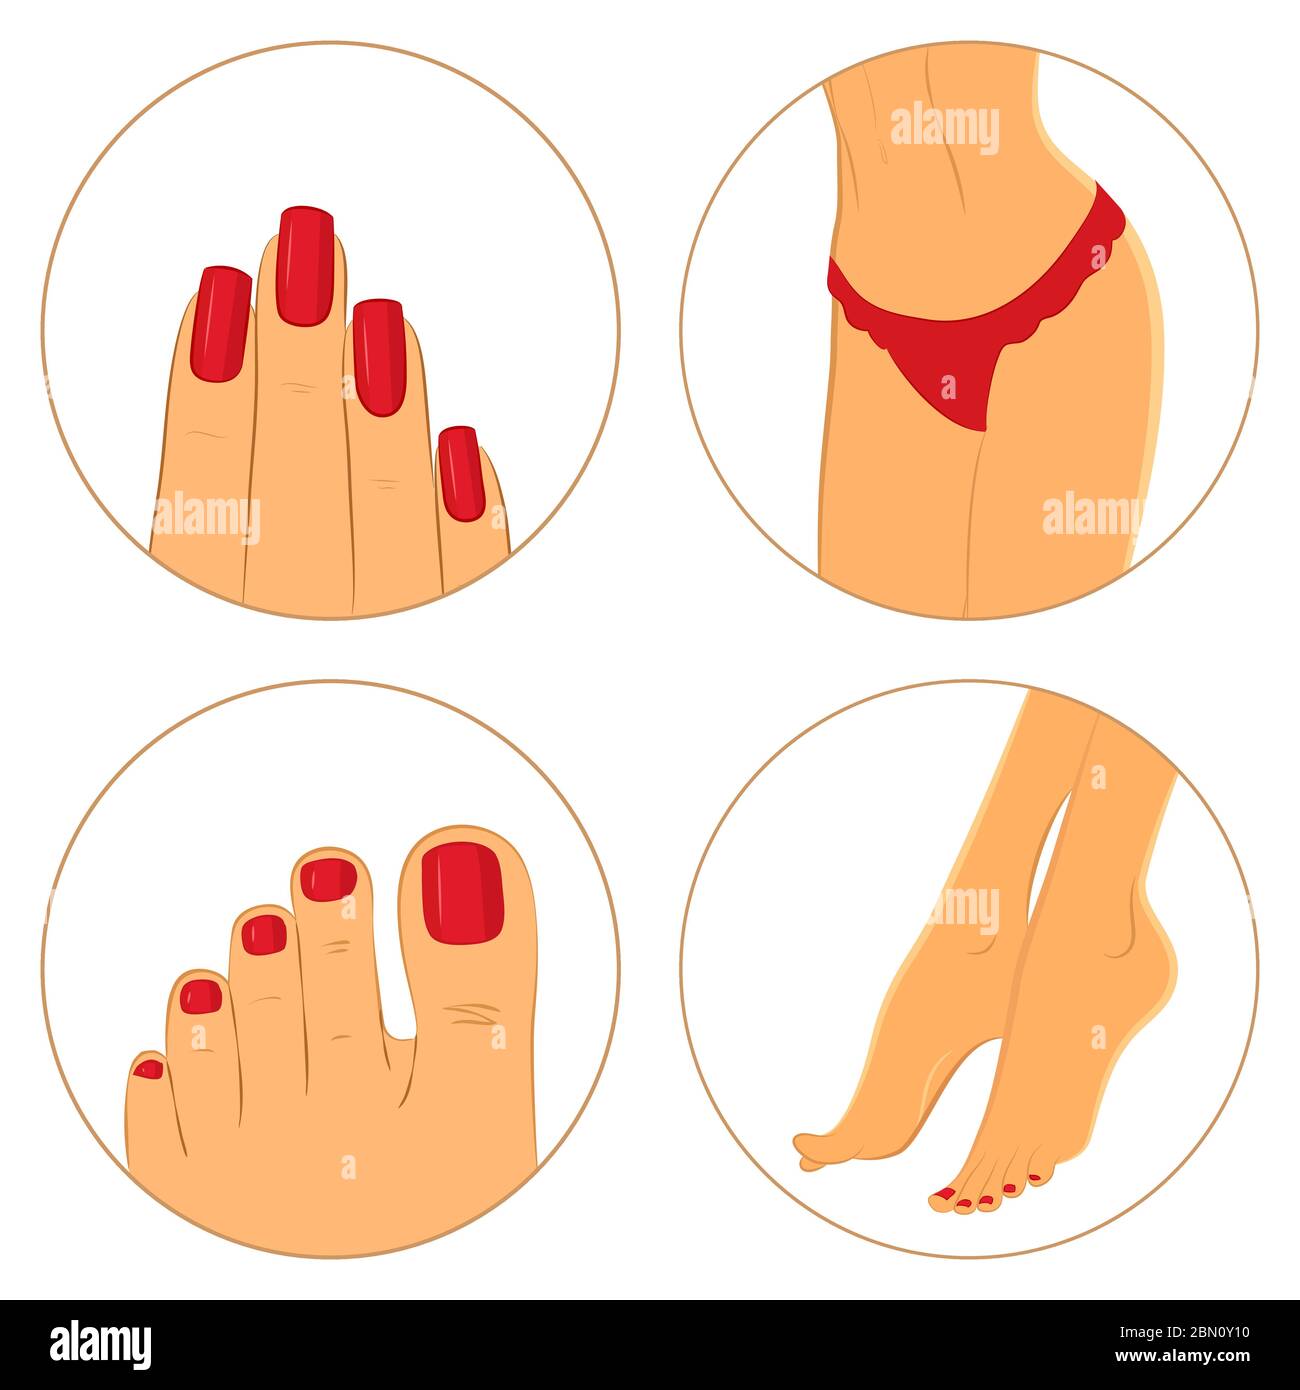 Manicure, pedicure and body care vector icon set. Pack of 4 icons isolated on white background Stock Vector